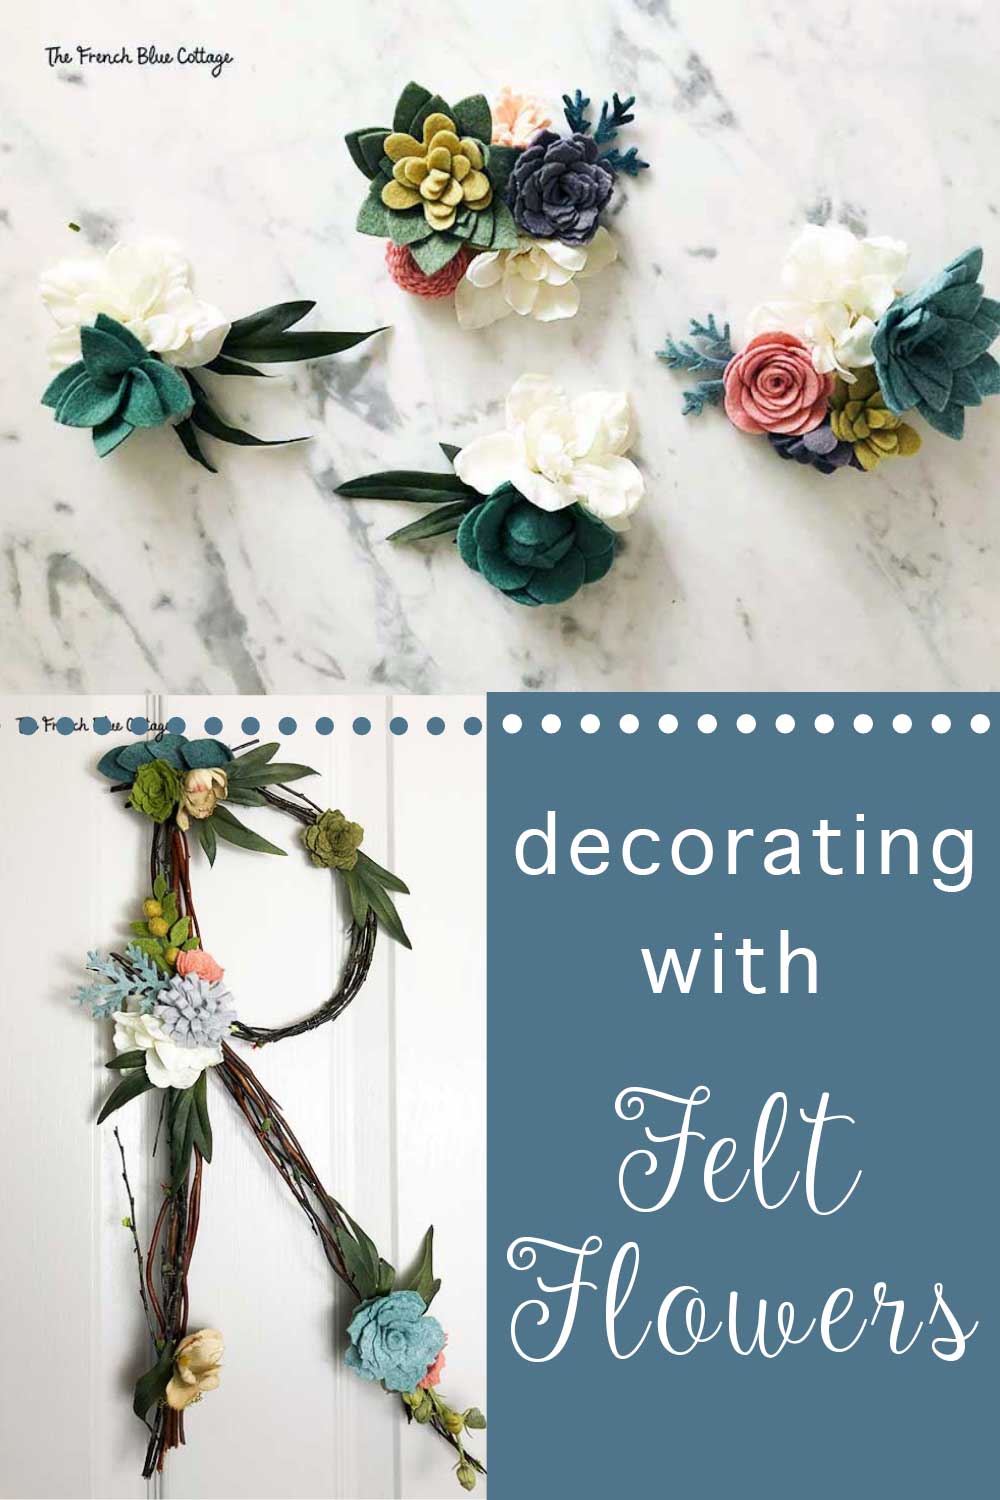 twig initials and decorating with felt flowers